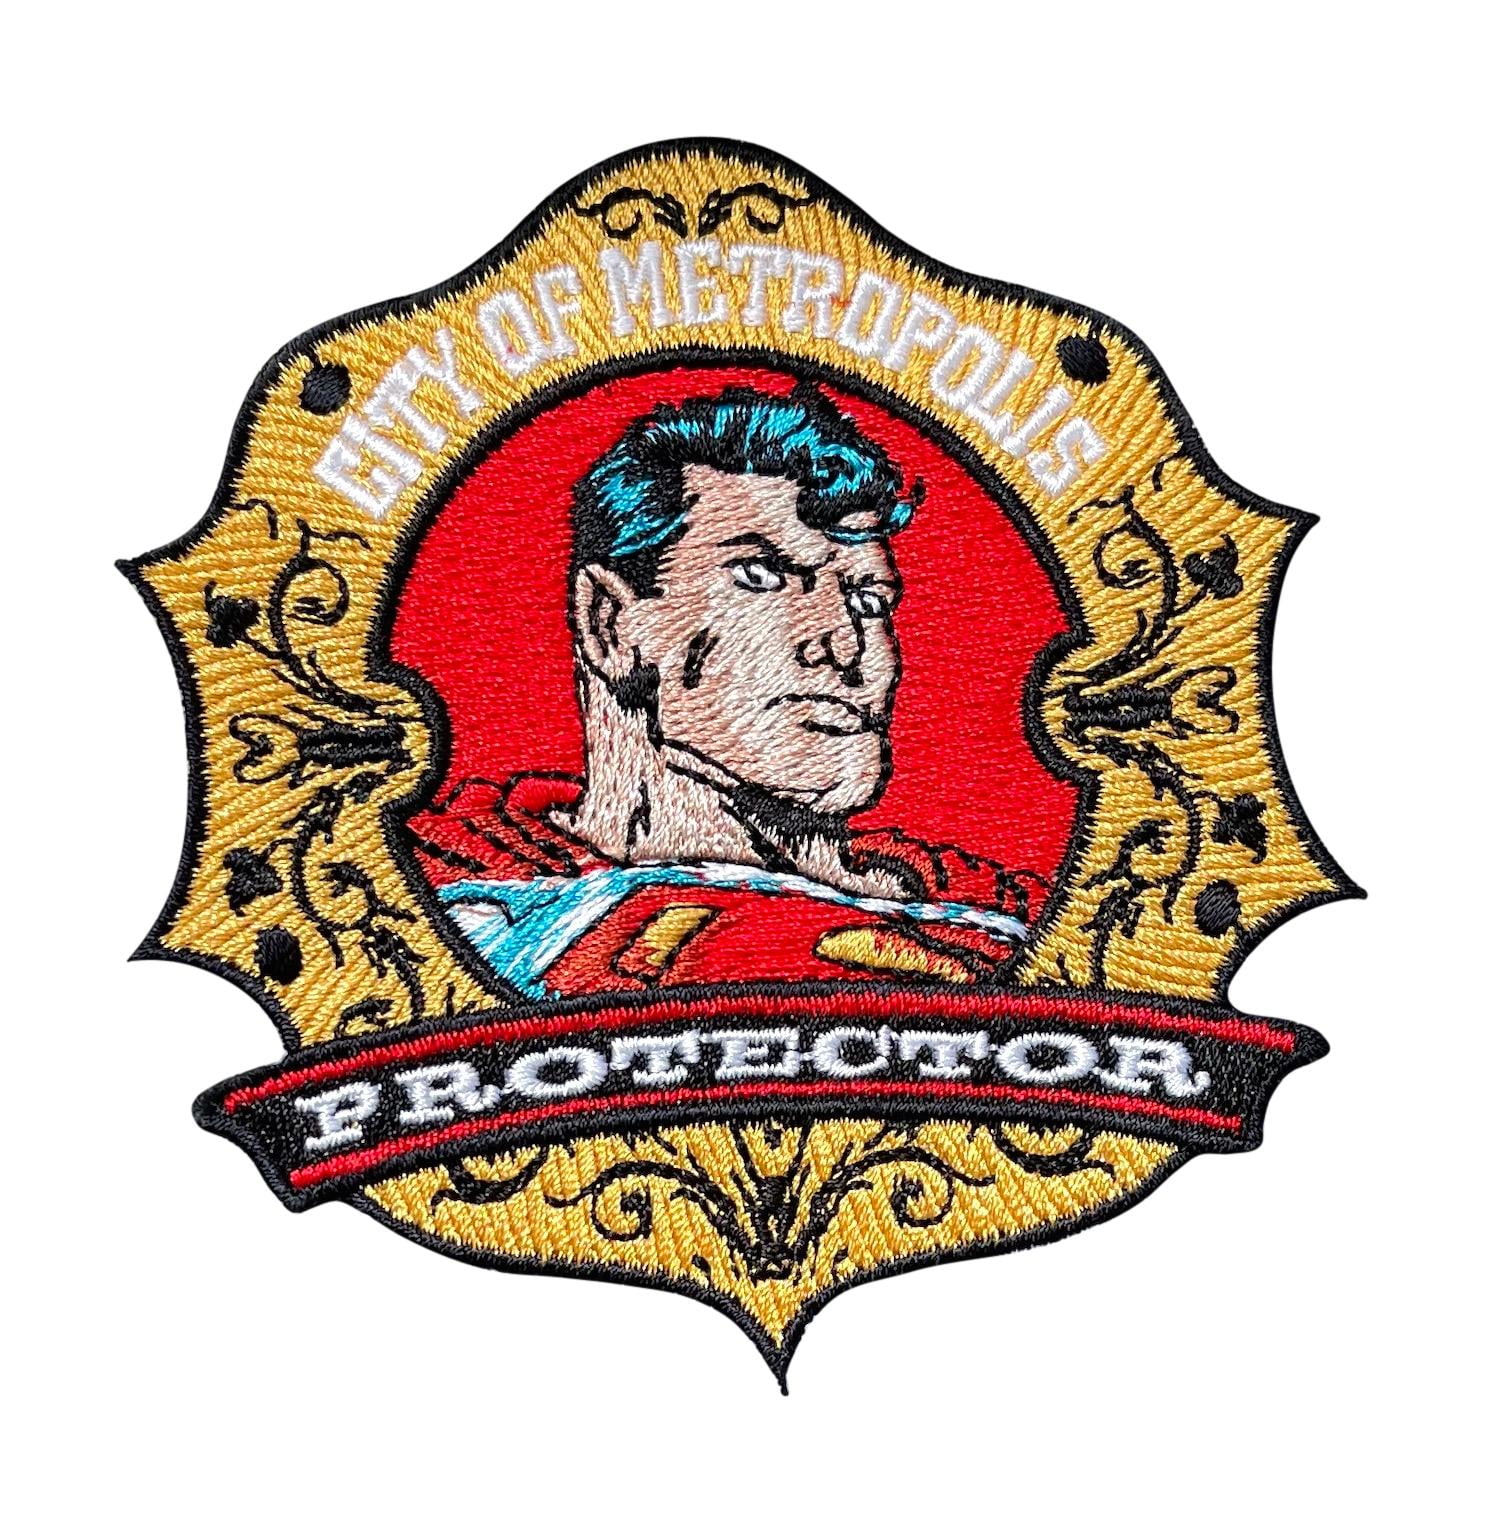 SM007 7 INCH AWESOME SUPERMAN PATCH 